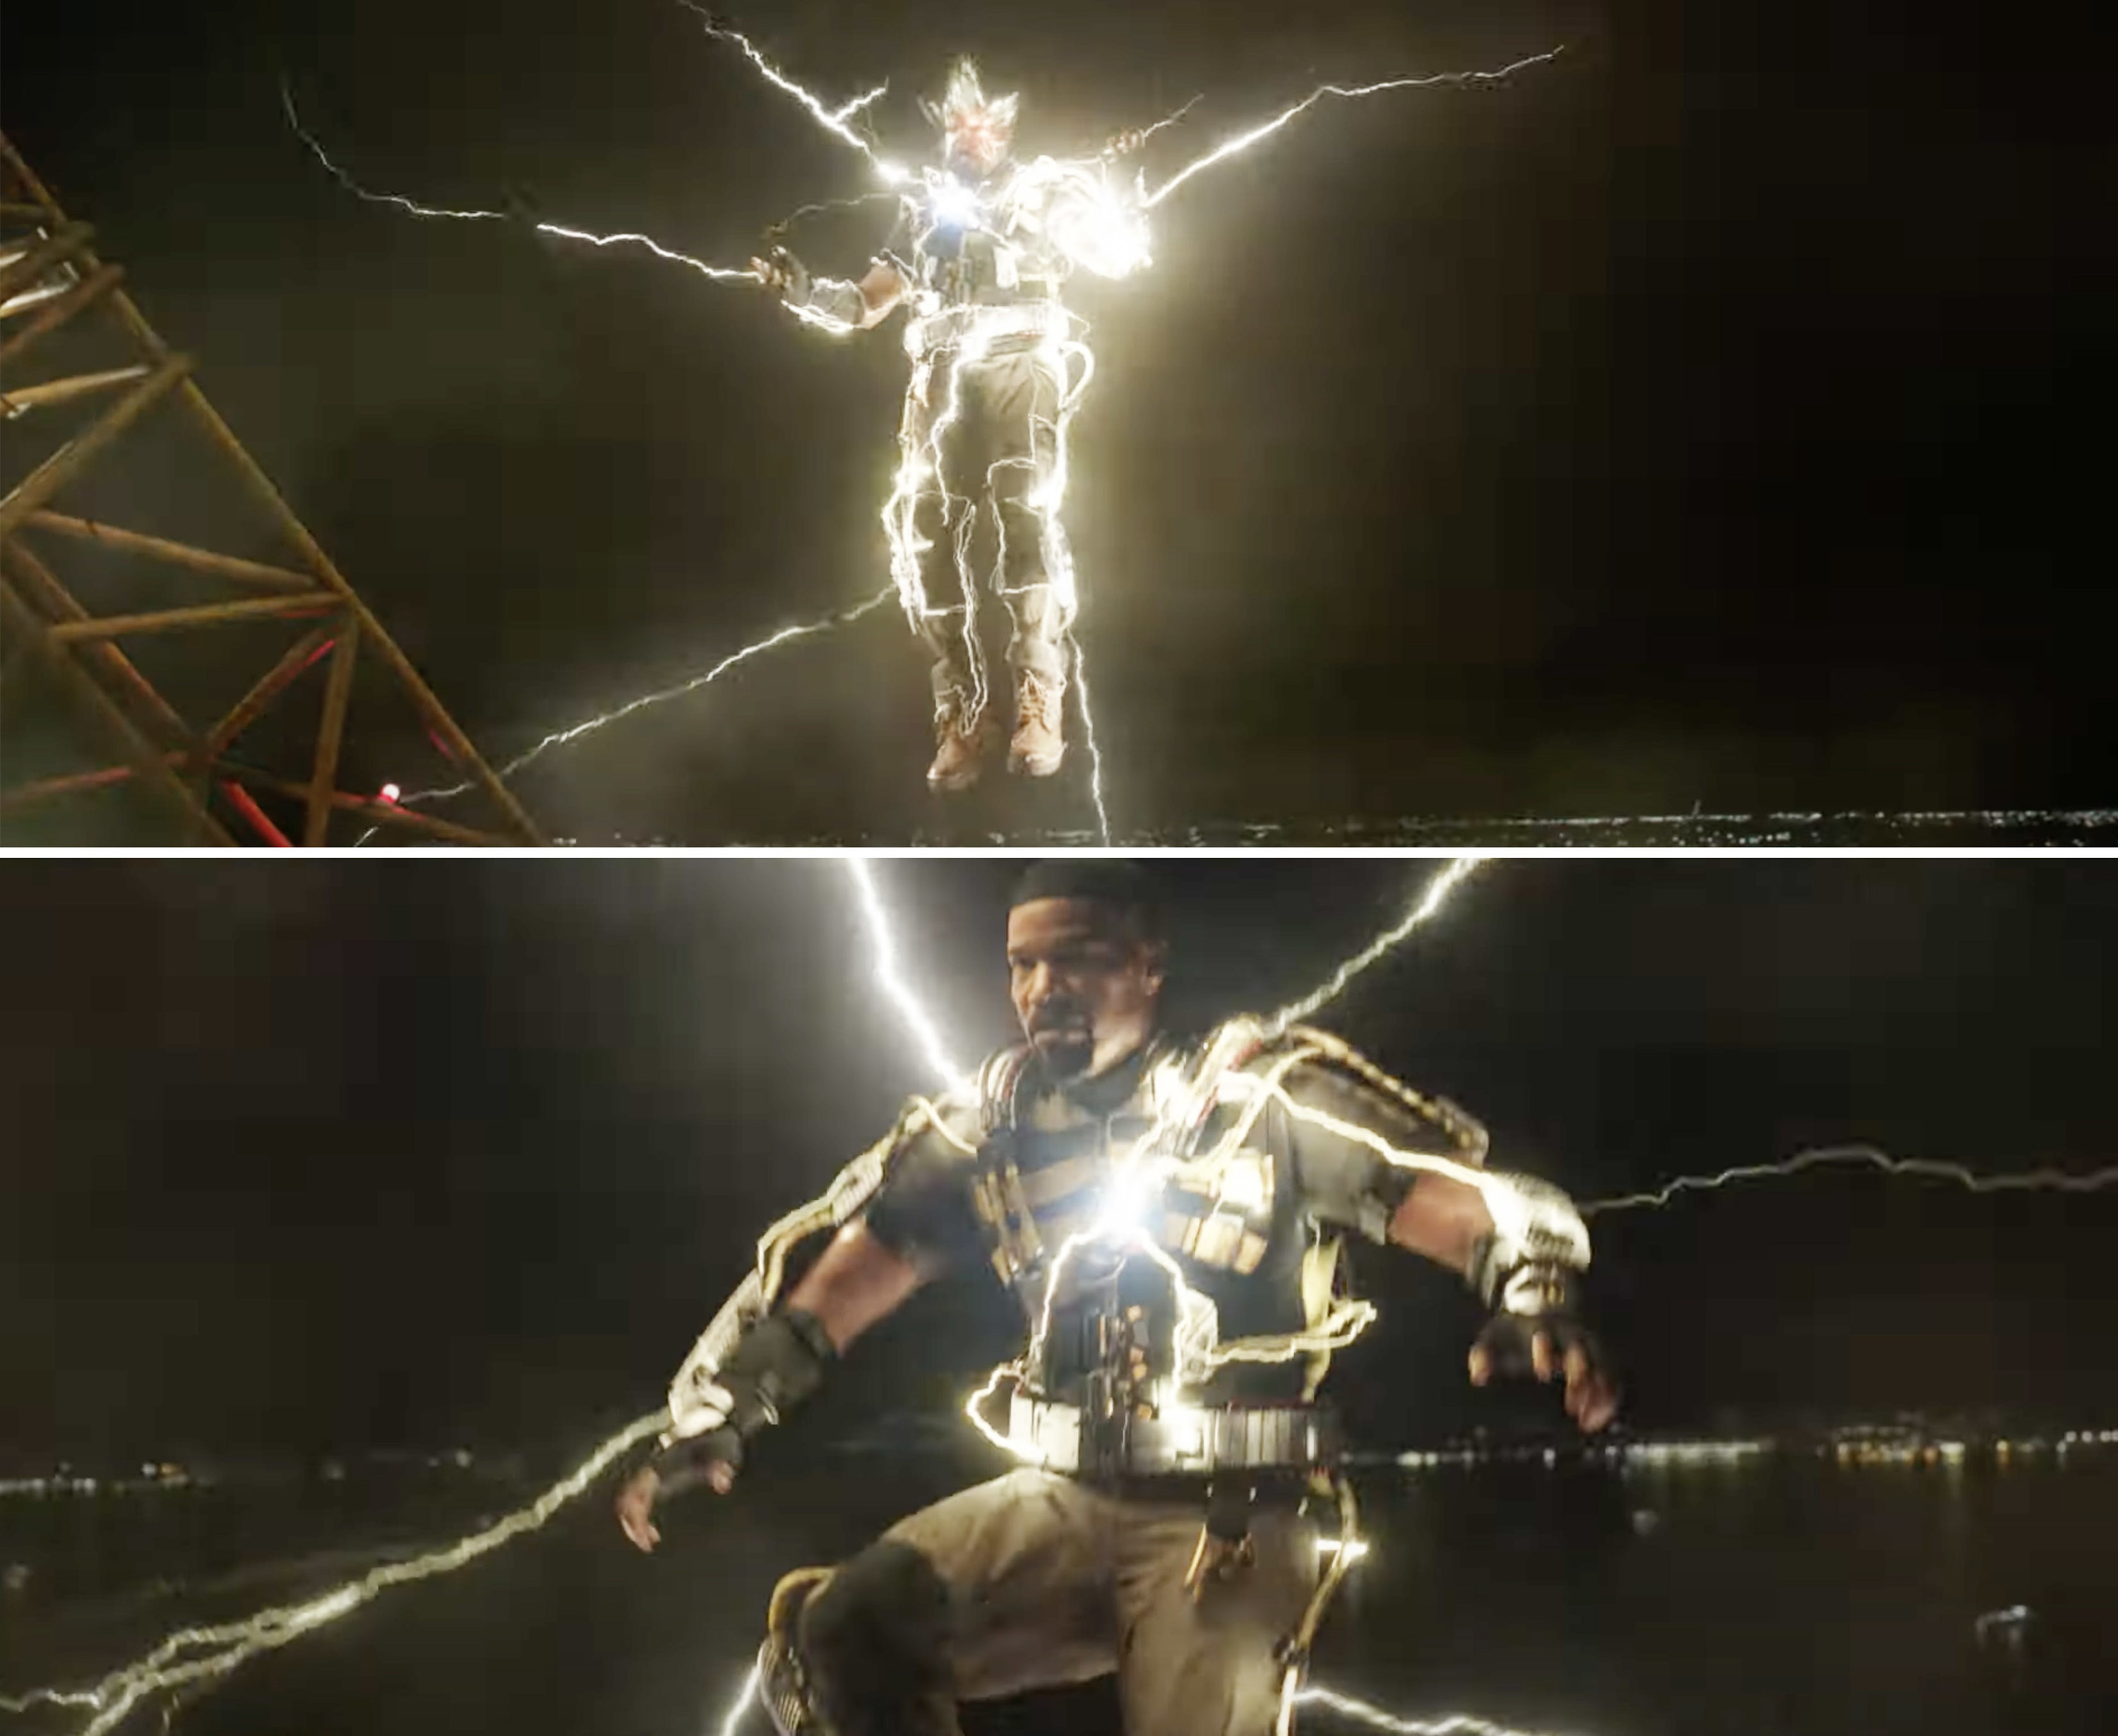 Electro suspended in the air and lightning strikes around him